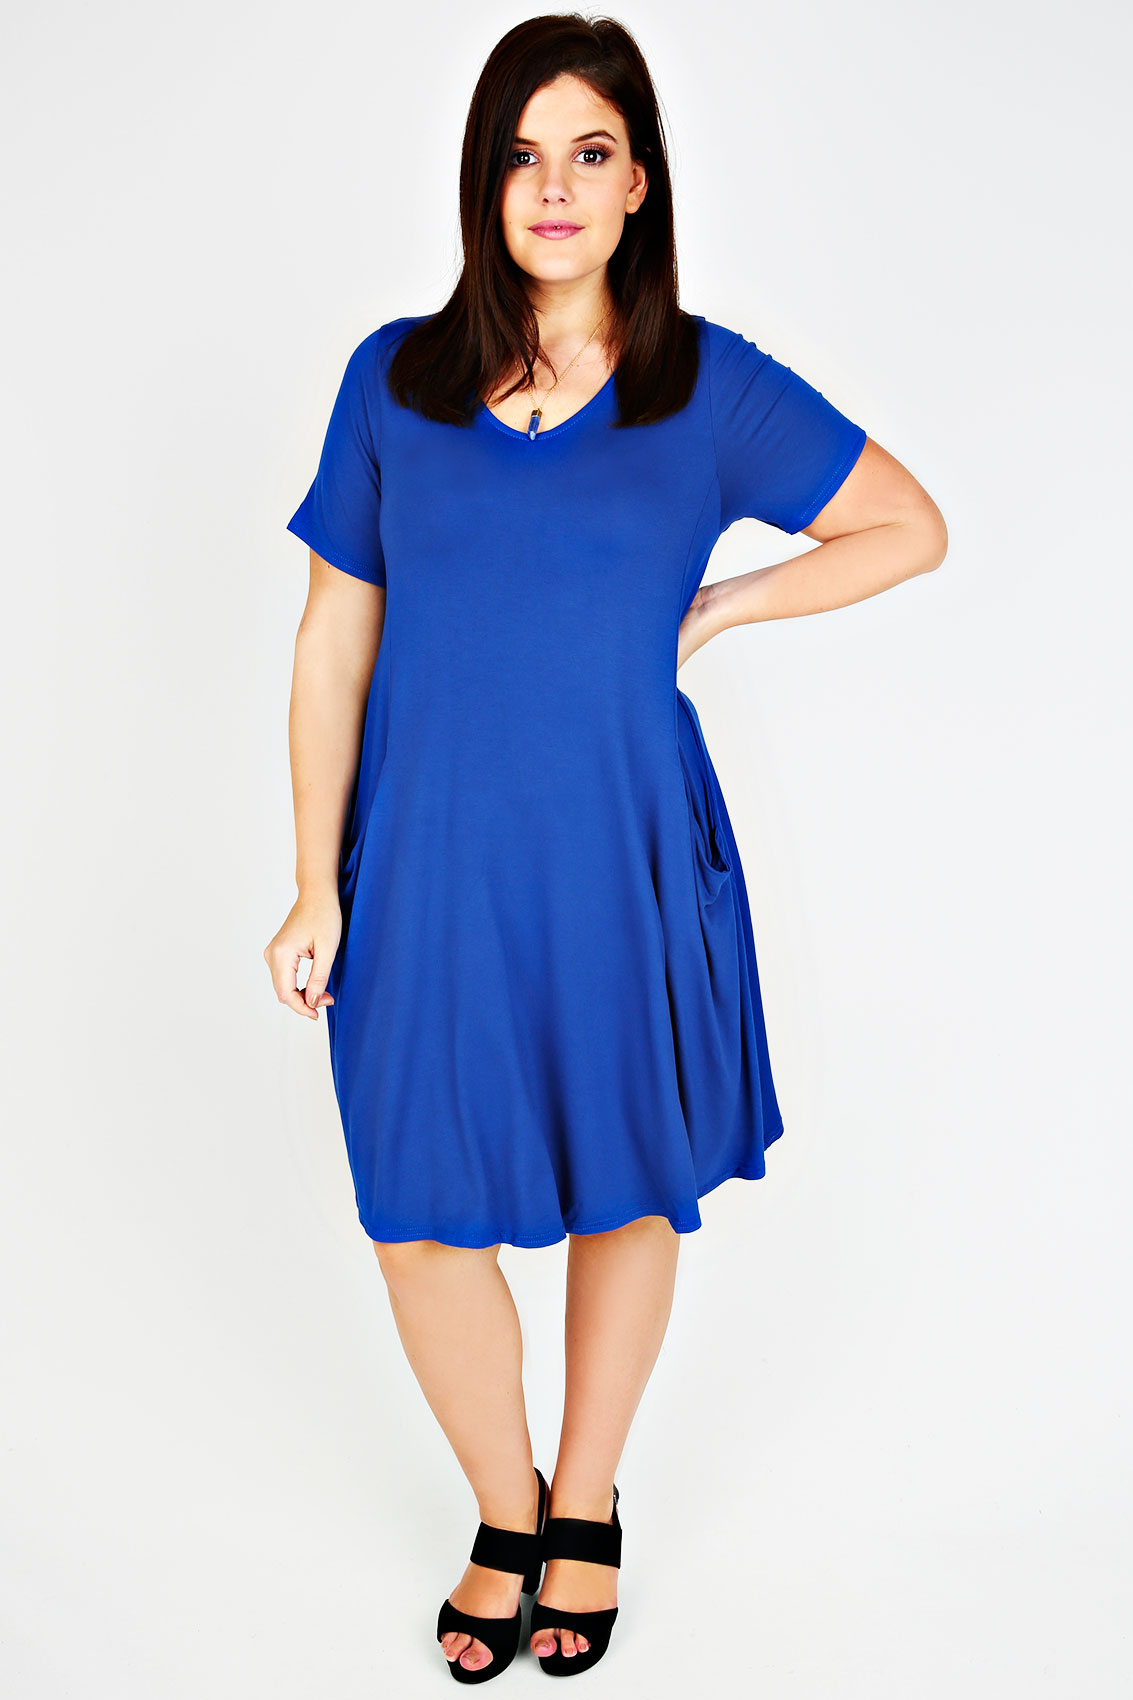 Blue Jersey Dress With Drop Pockets Plus Size 16 to 36